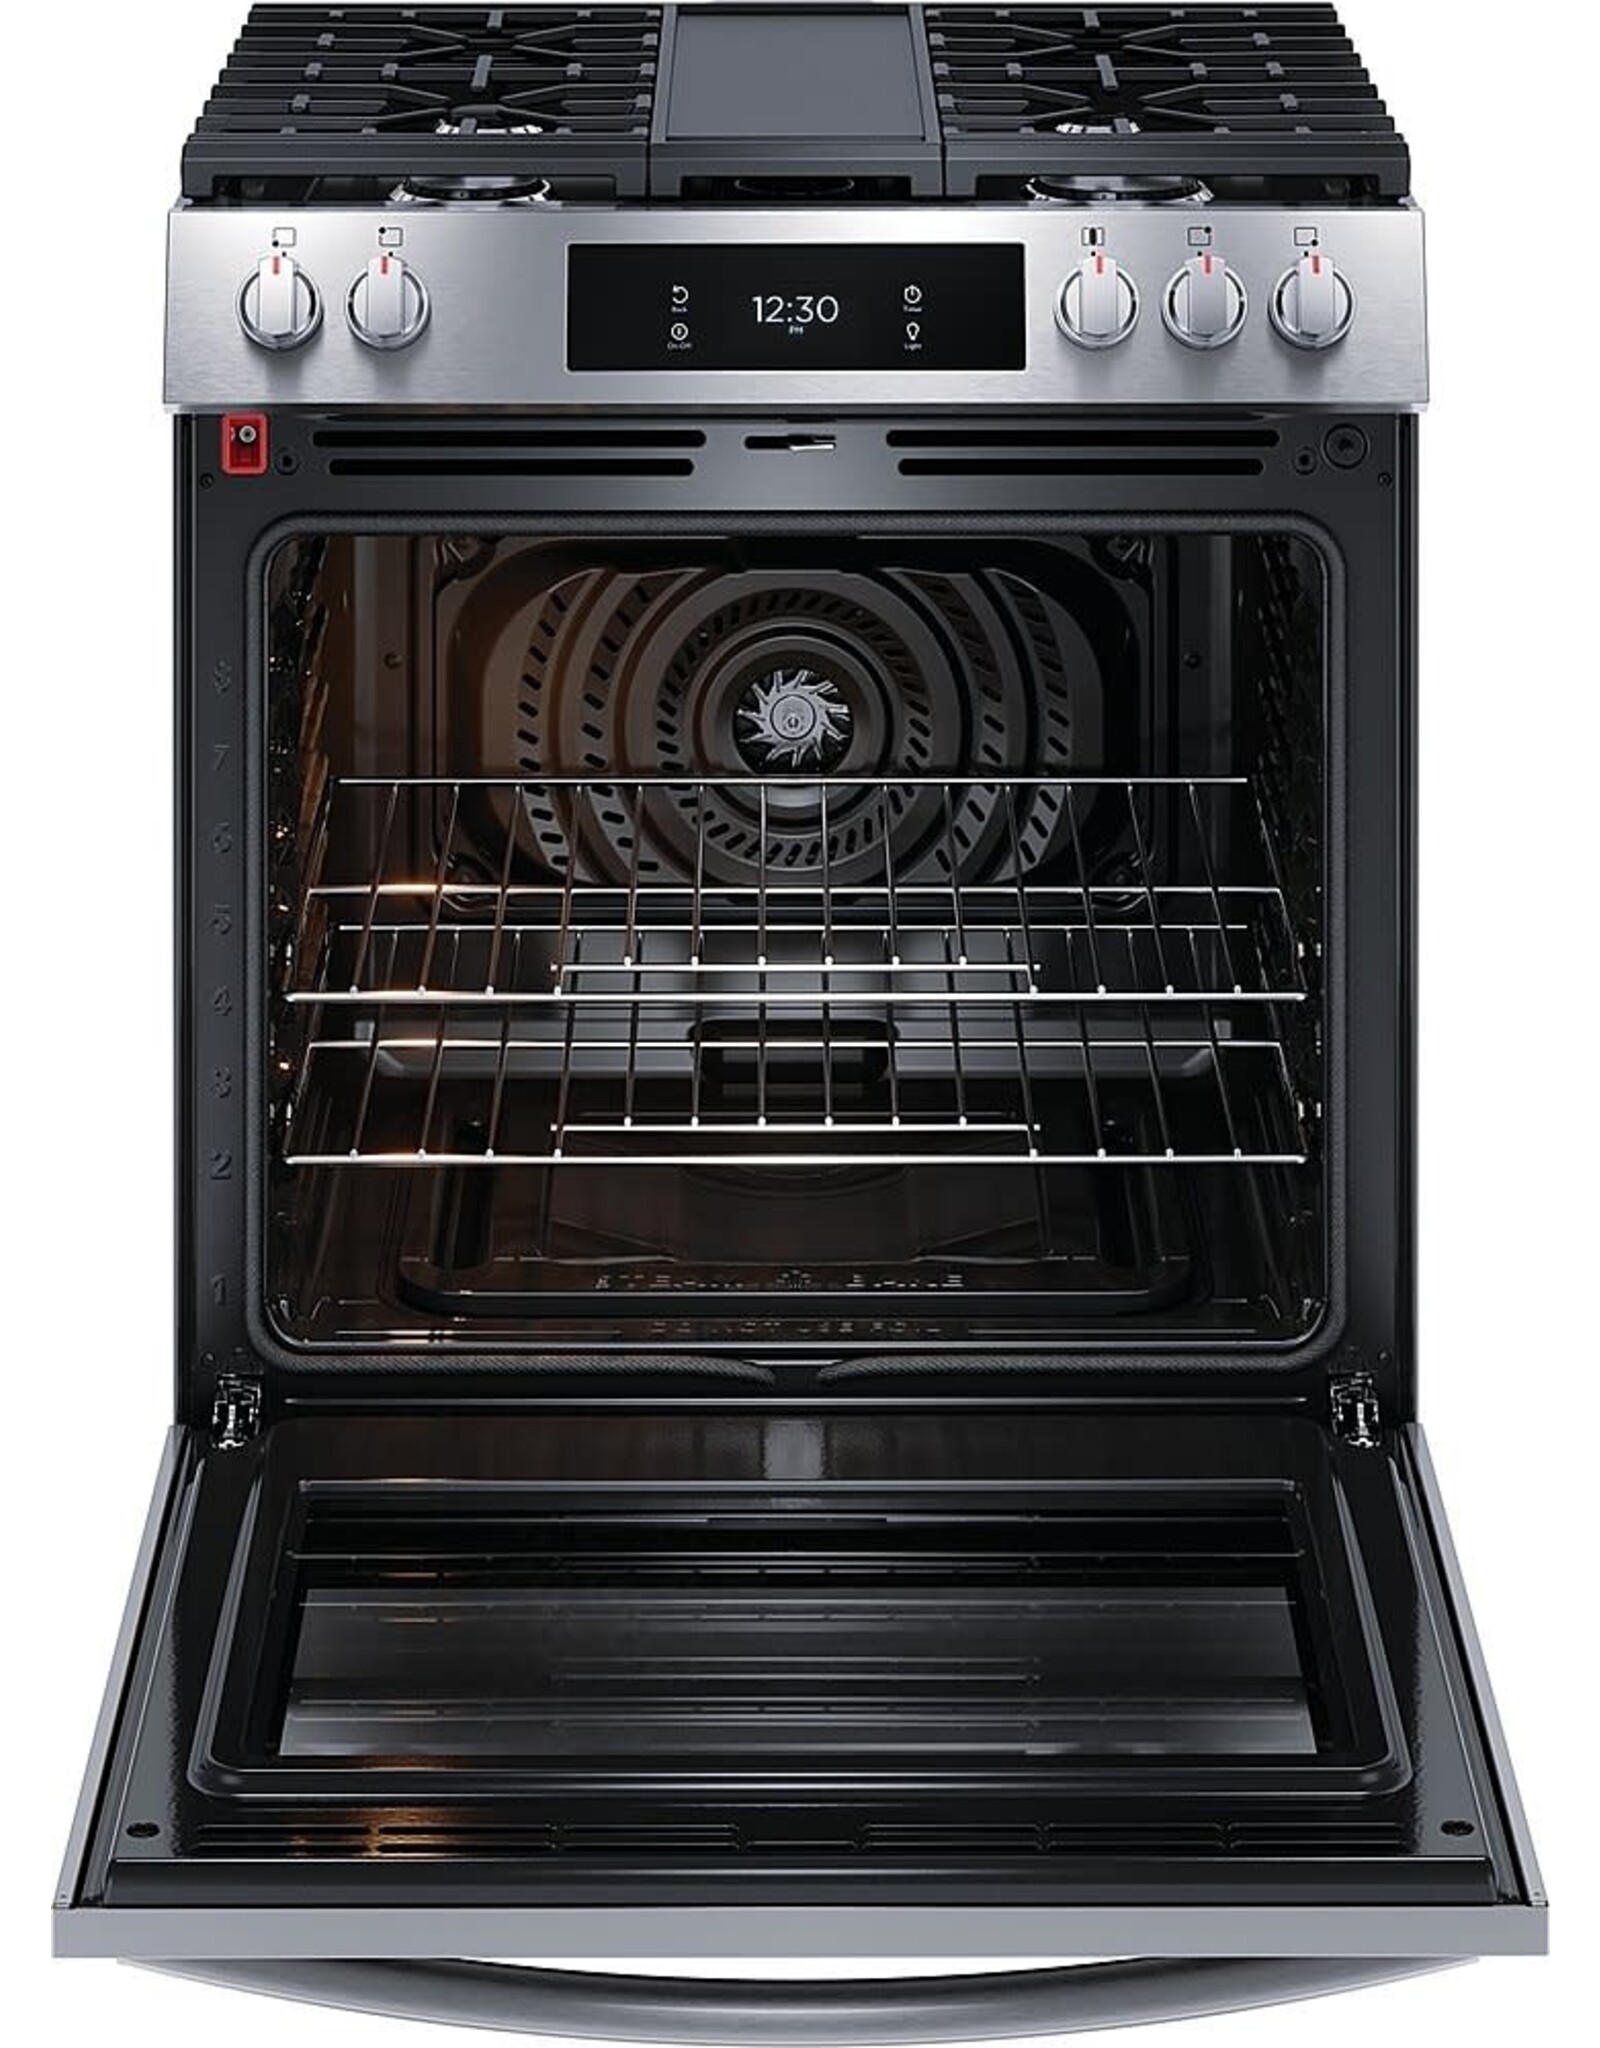 FRIGIDAIRE GCFG3060BFA FRIGIDAIRE GALLERY 30 in. 6 cu. ft. 5 Burner Slide-In Gas Range with Total Convection and Air Fry in Smudge Proof Stainless Steel